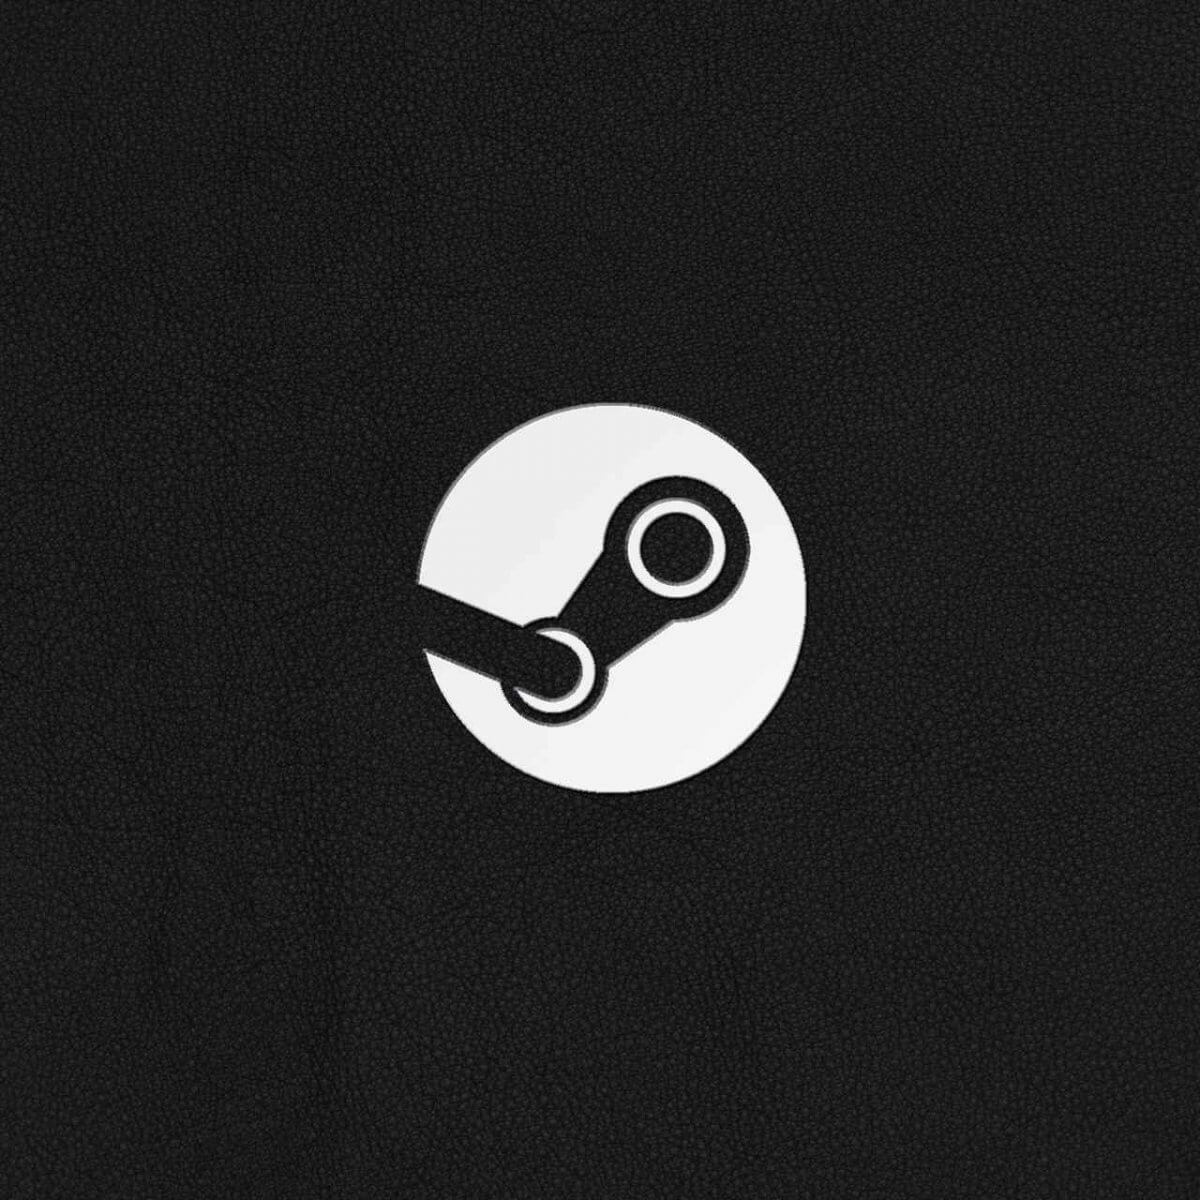 How To Launch Steam Games In Windowed Mode